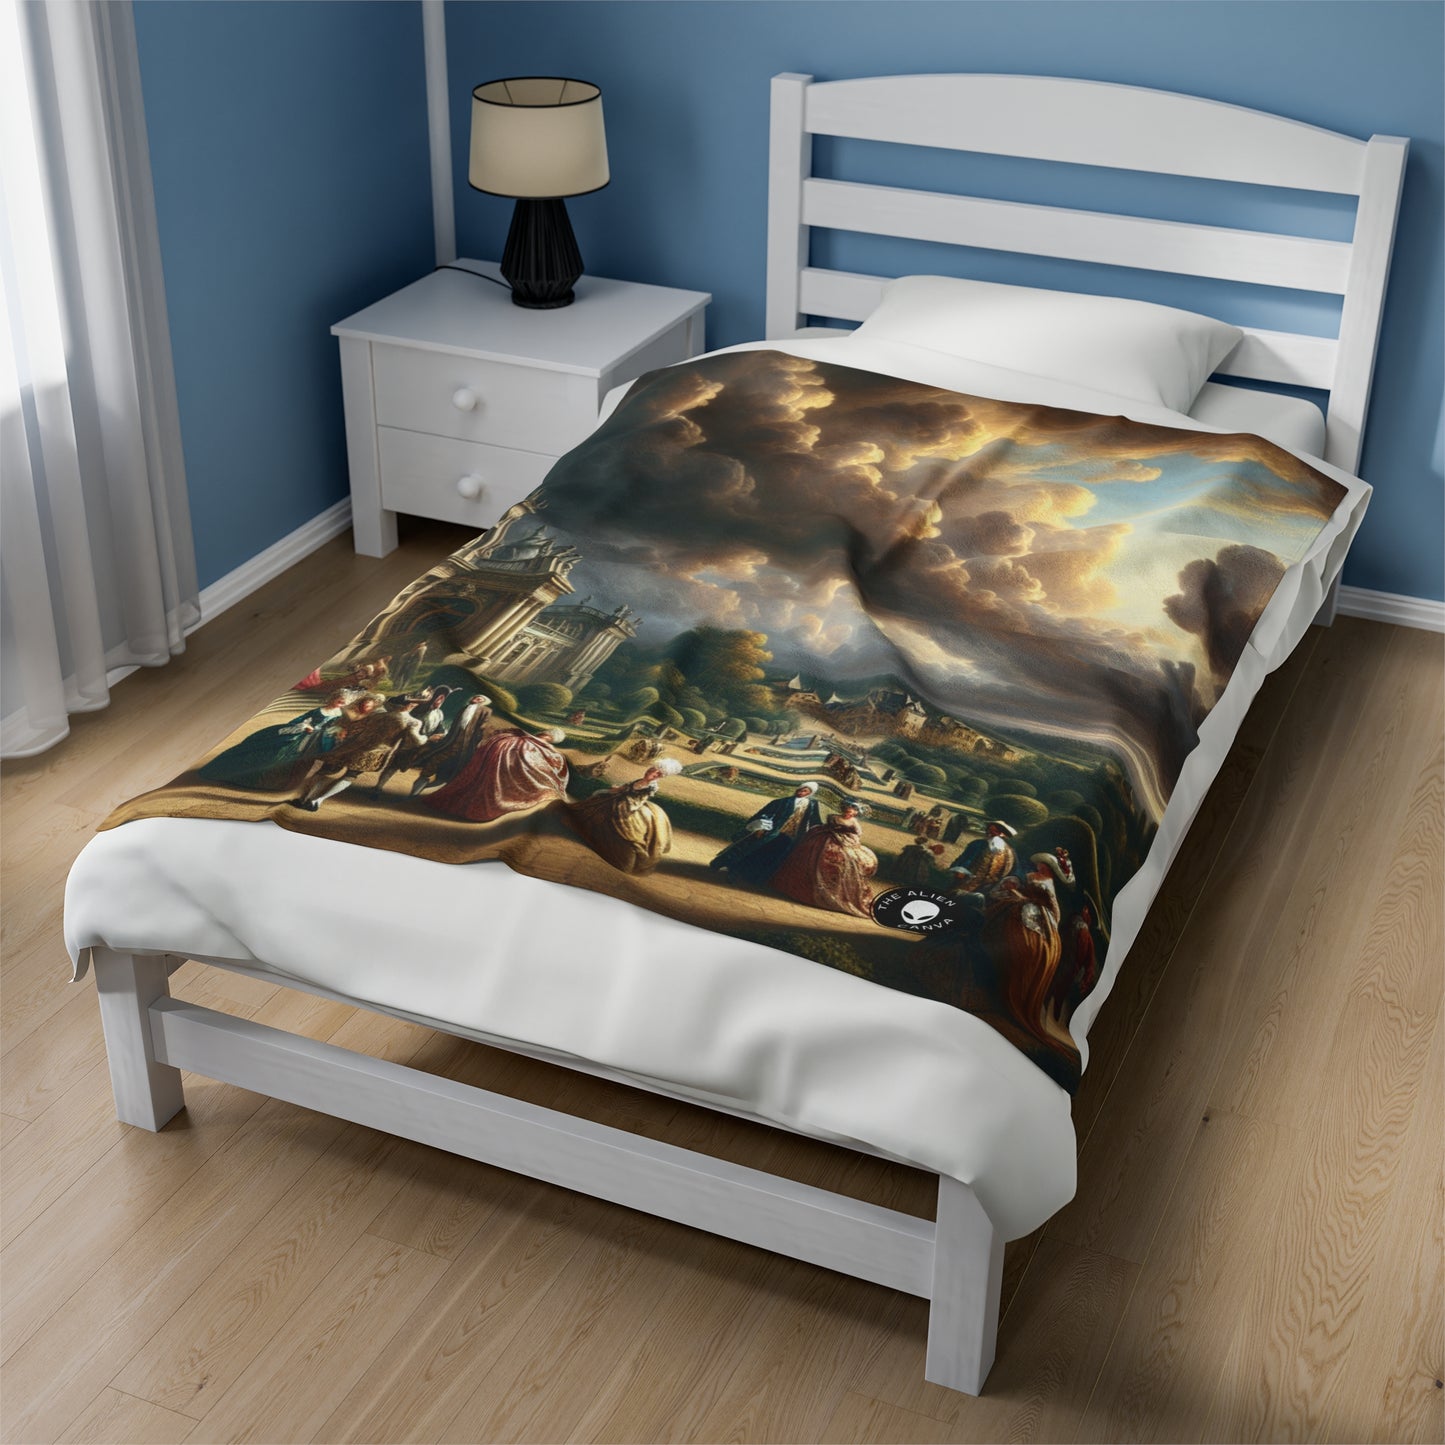 "Royal Banquet in a Baroque Palace" - The Alien Velveteen Plush Blanket Baroque